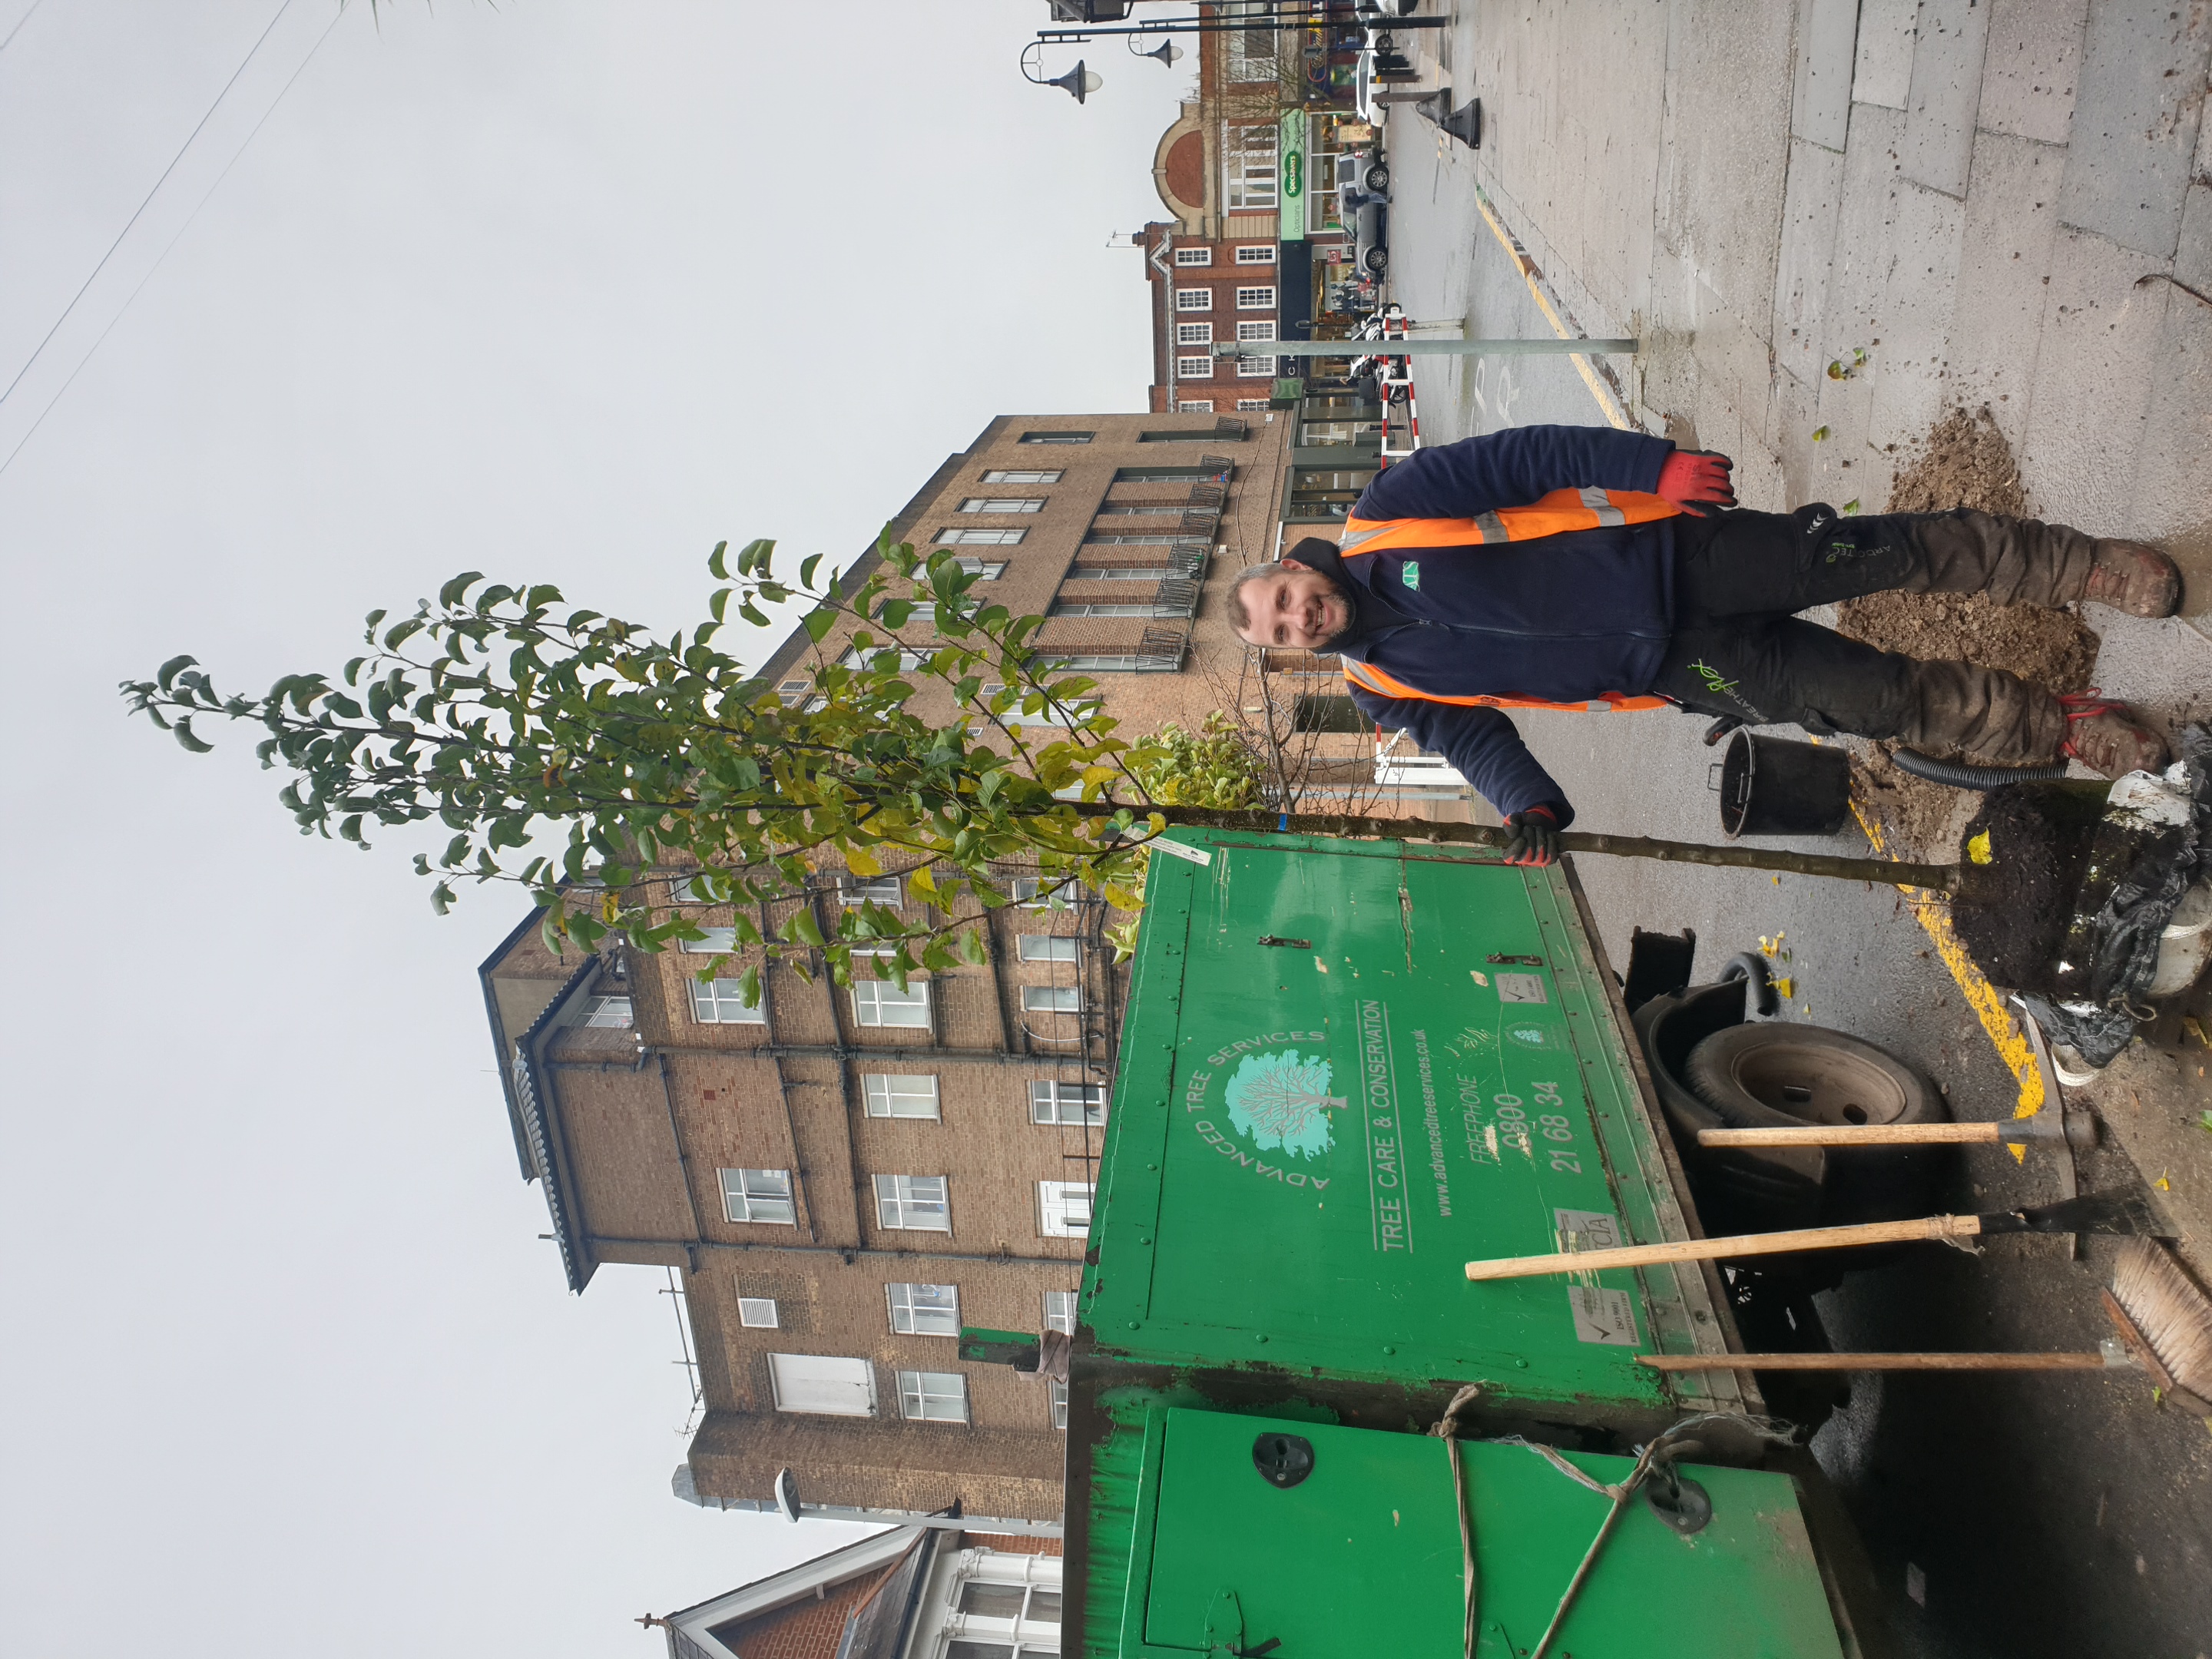 Kingston Council officer planting one of the new trees as part of the Winter Tree planting programme.